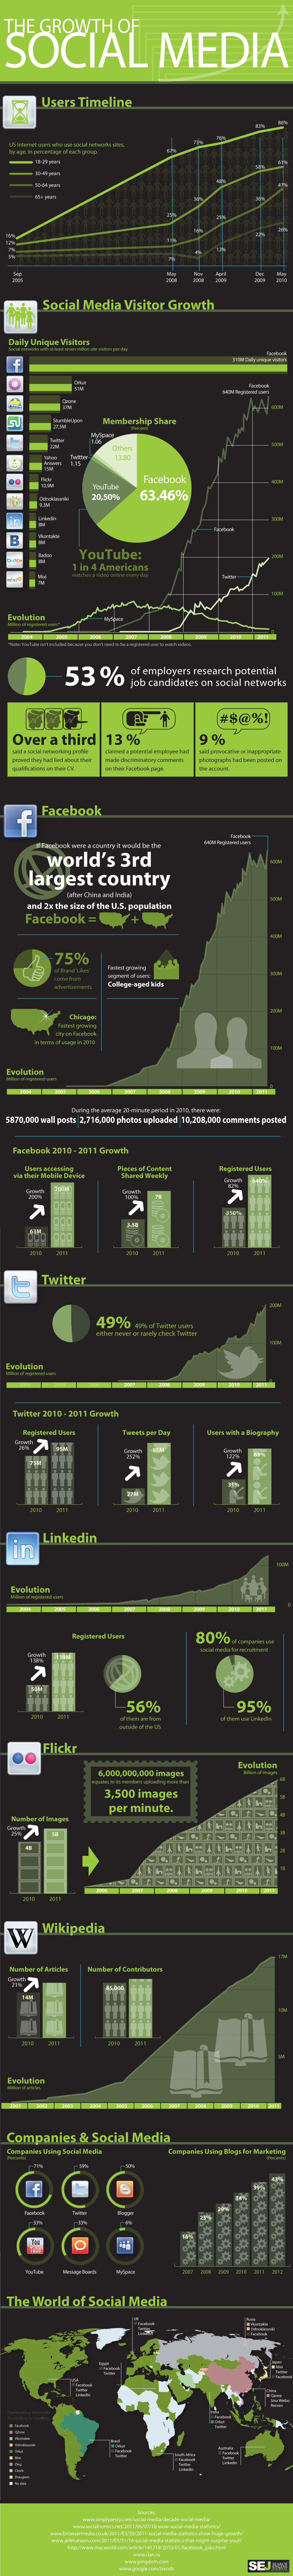 the growth of social media infographic